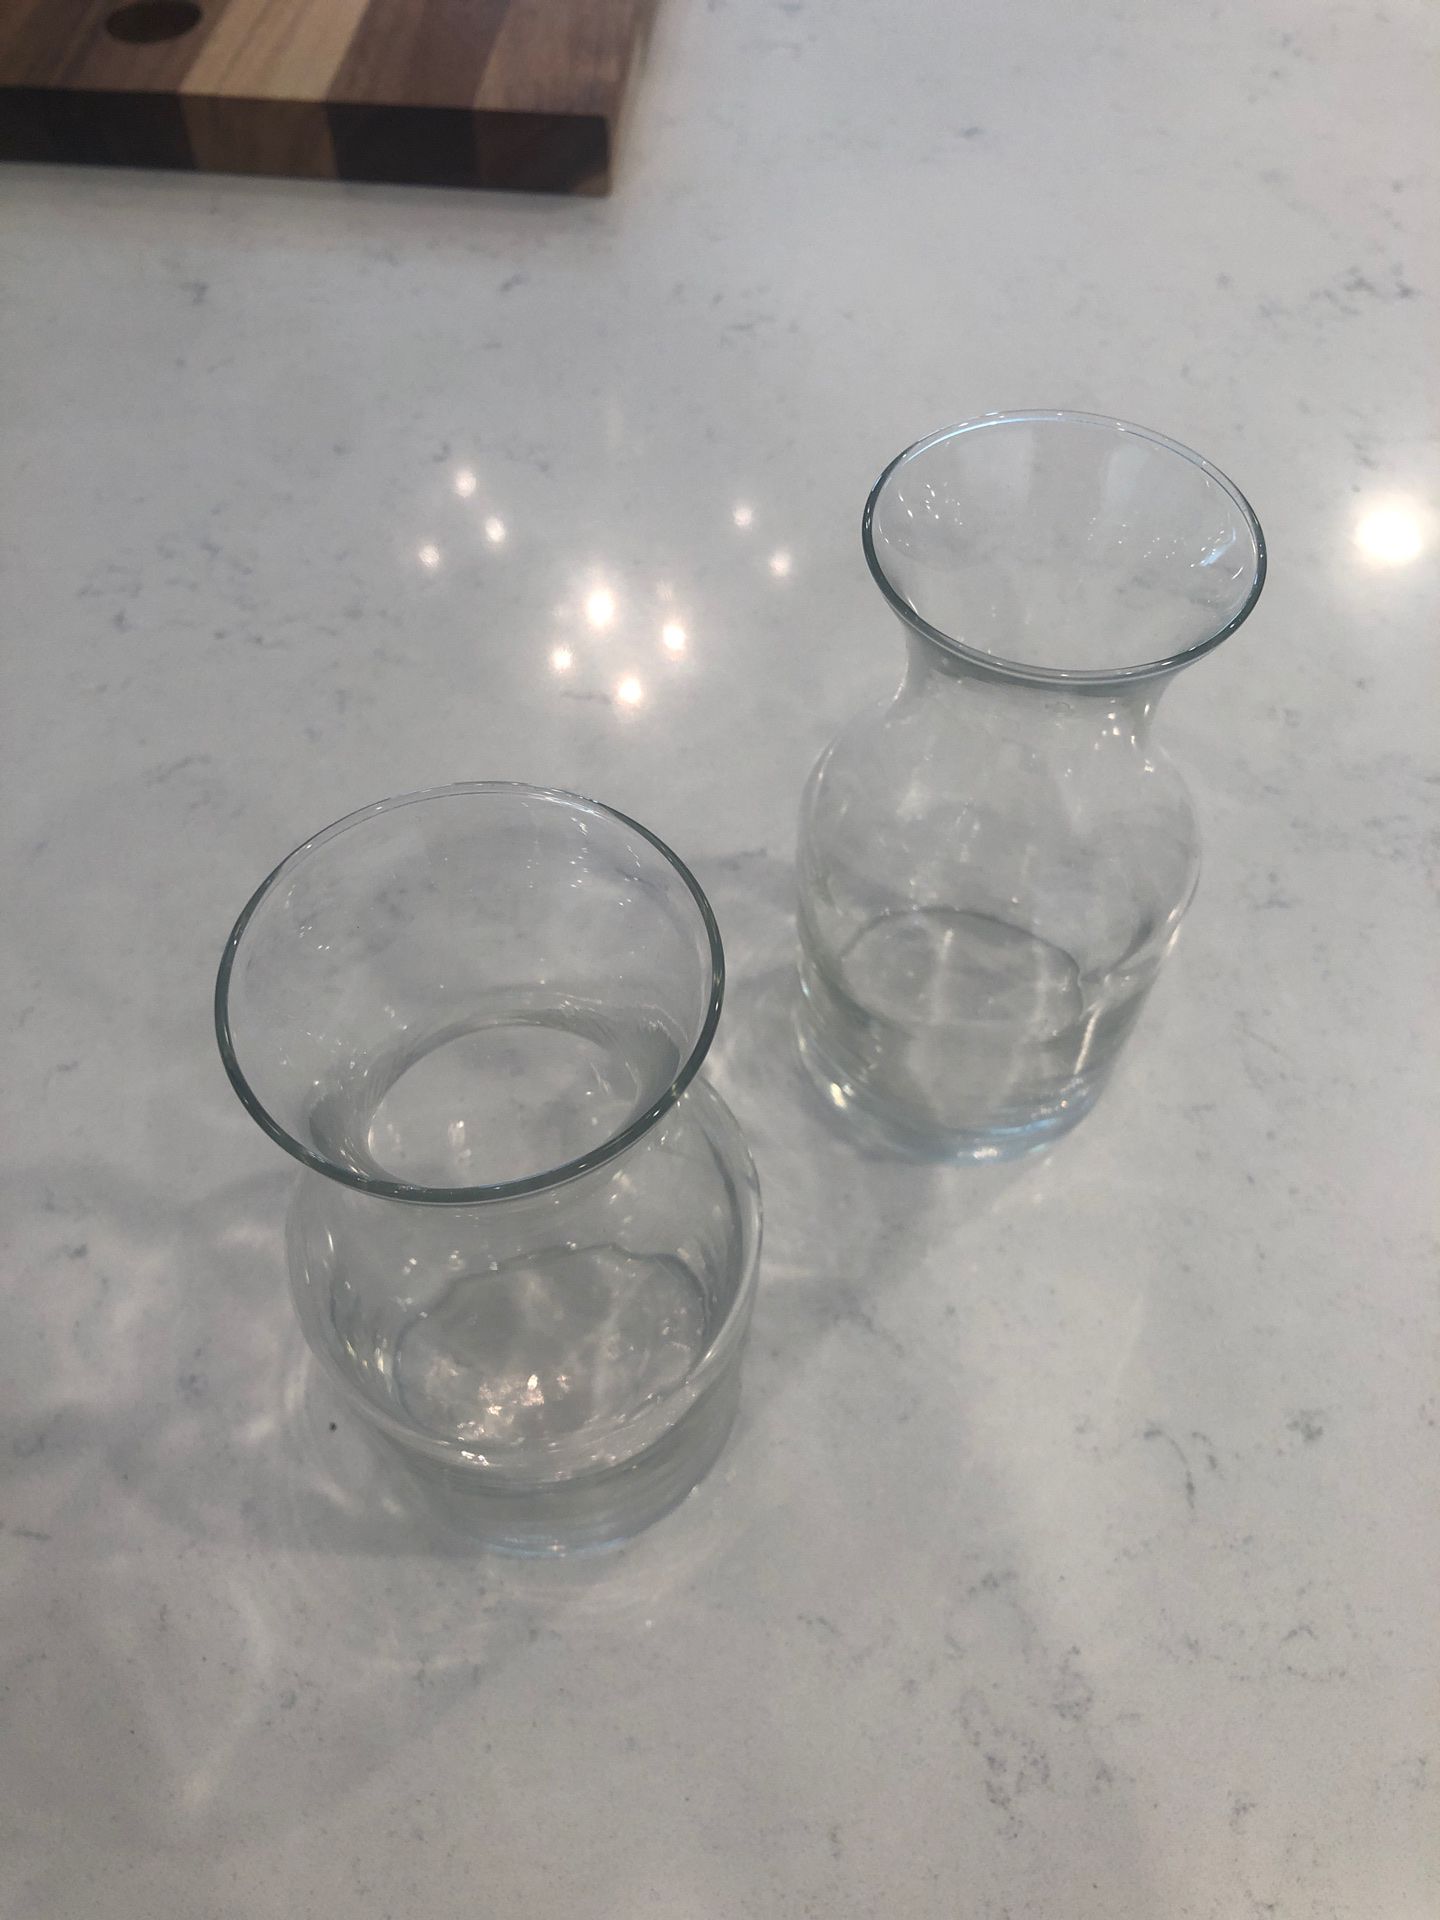 Small wine decanters/carafes